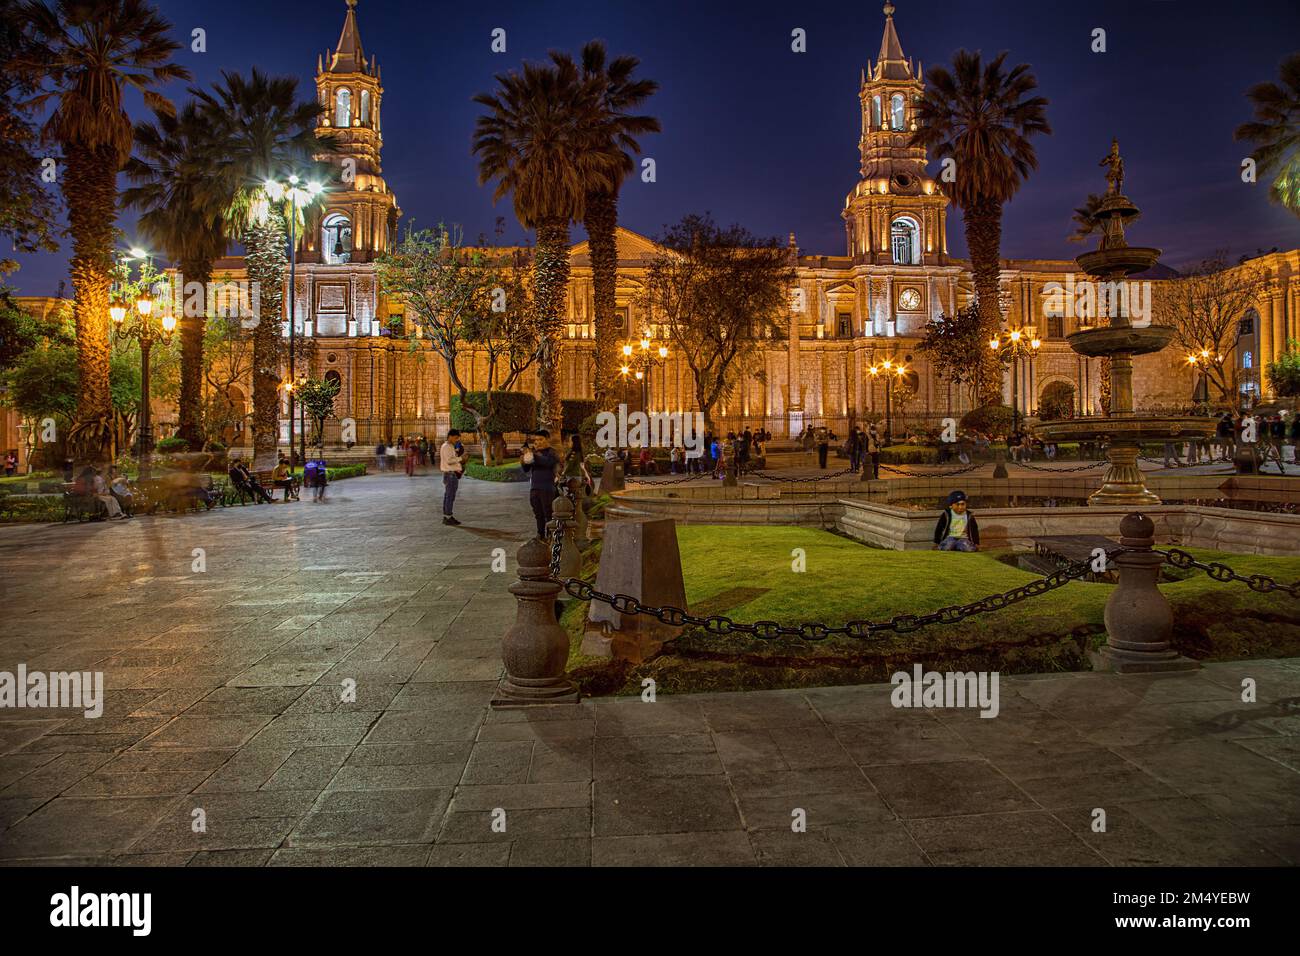 Arequipa, Peru - September 15, 2022: Long exposure at night of the Plaza de Armas in Arequipa with its fountain and Cathedral in the background. Stock Photo